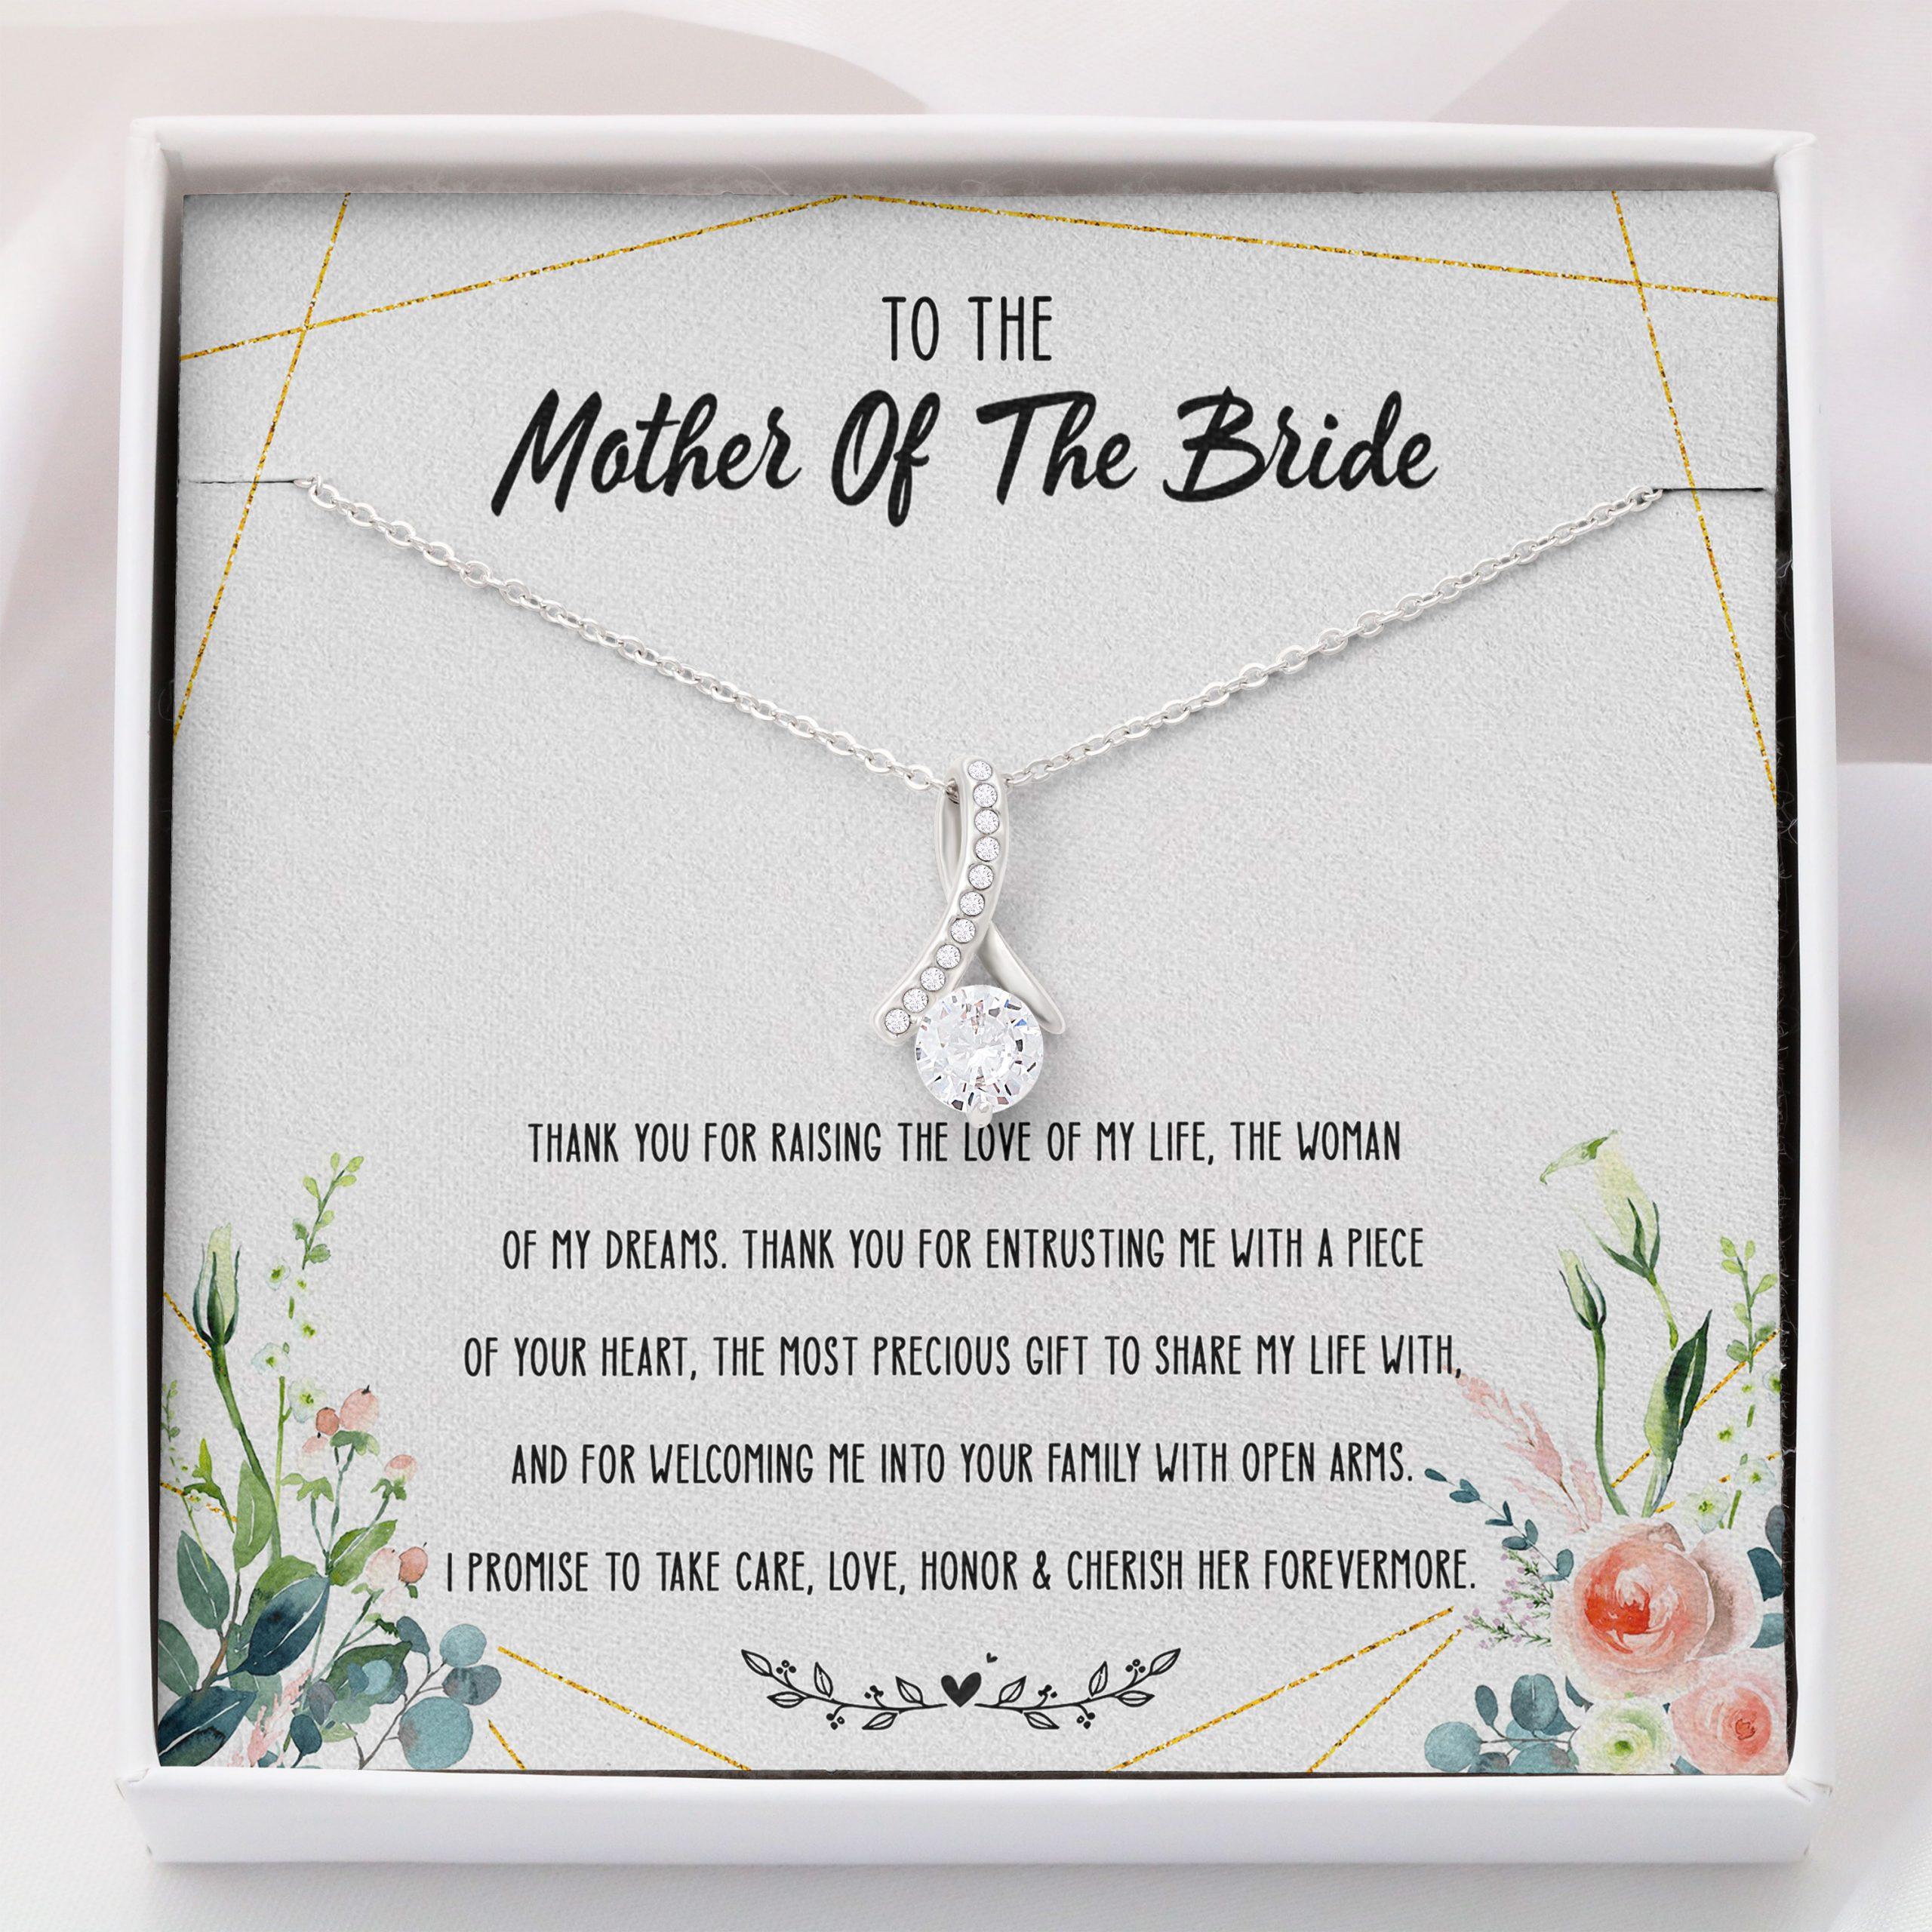 Mom Necklace, To Mother Of The Bride Gift Necklace With Box Message Card -Jewelry For Mother Of The Bride Wedding Gift